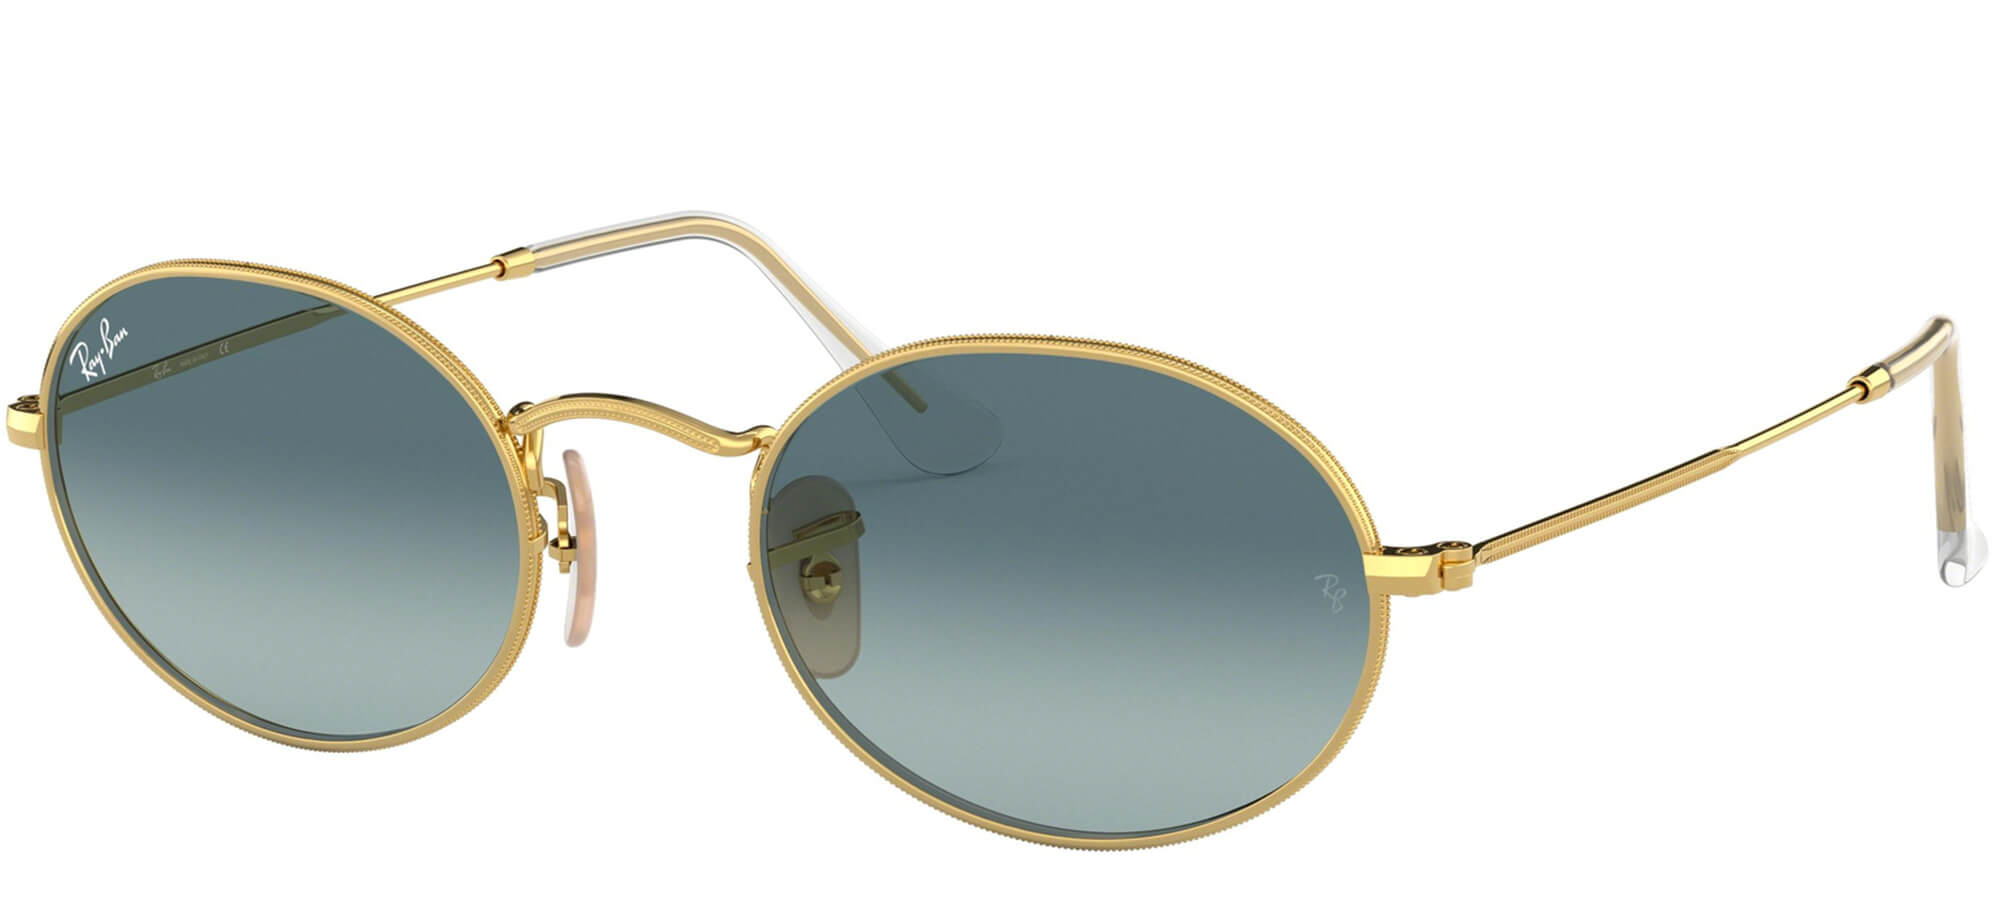 Ray-BanOVAL RB 3547Gold/blue Grey Shaded (001/3M A)